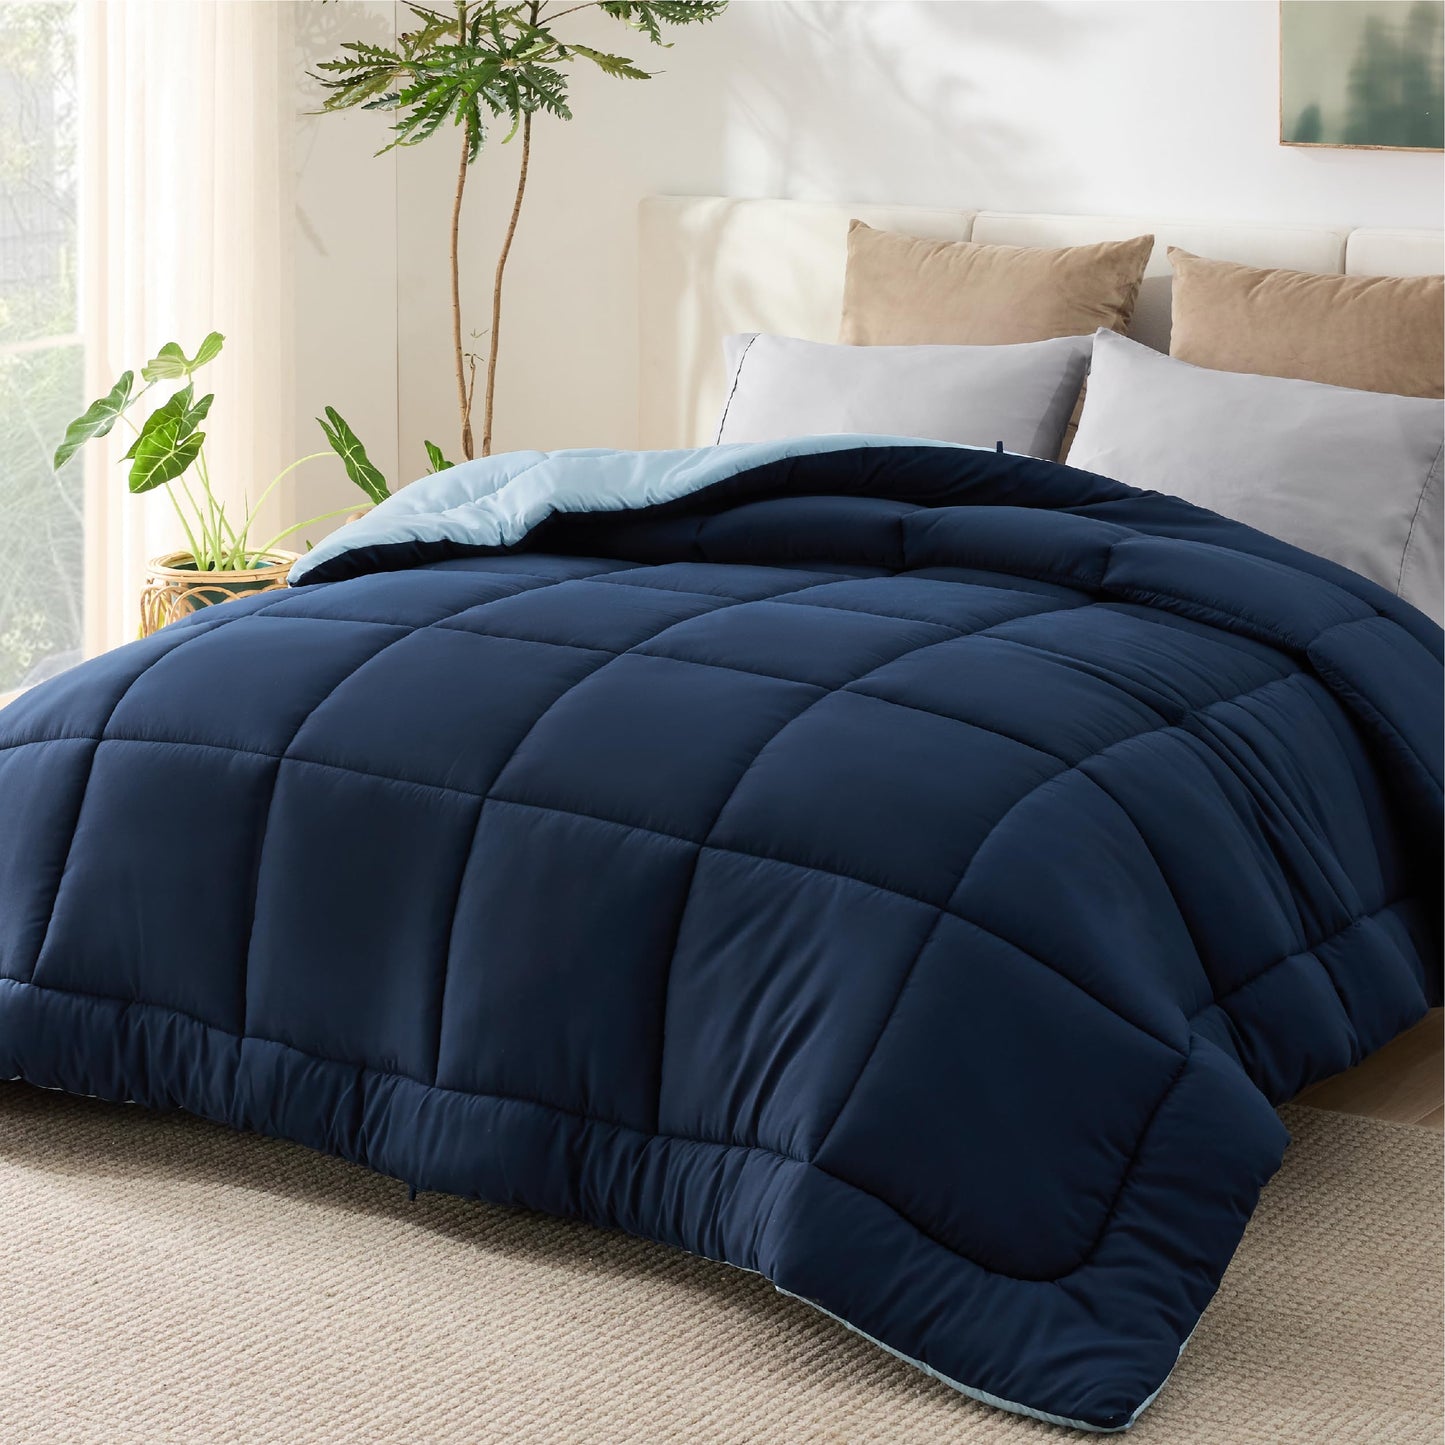 Bedsure Twin Reversible Comforter Duvet Insert - All Season Quilted Comforters Twin Size, Down Alternative Twin Size Bedding Comforter with Corner Tabs - Blue/Light Blue